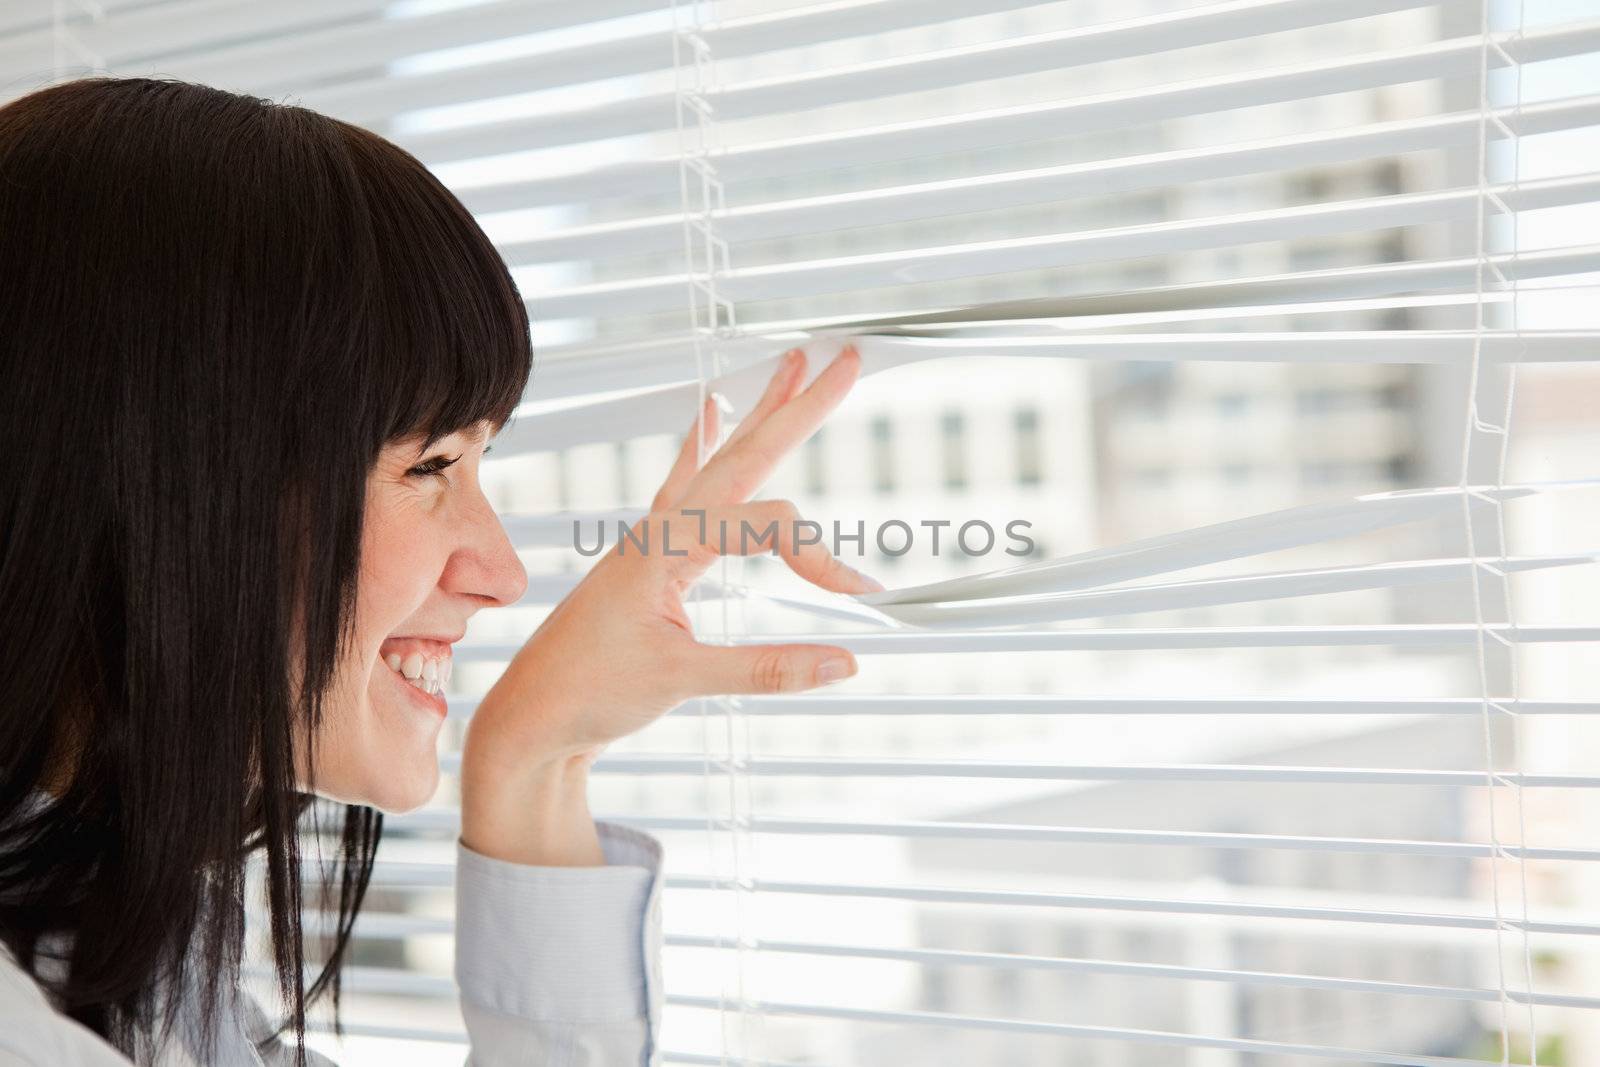 A woman smiles as she looks out through her window blinds